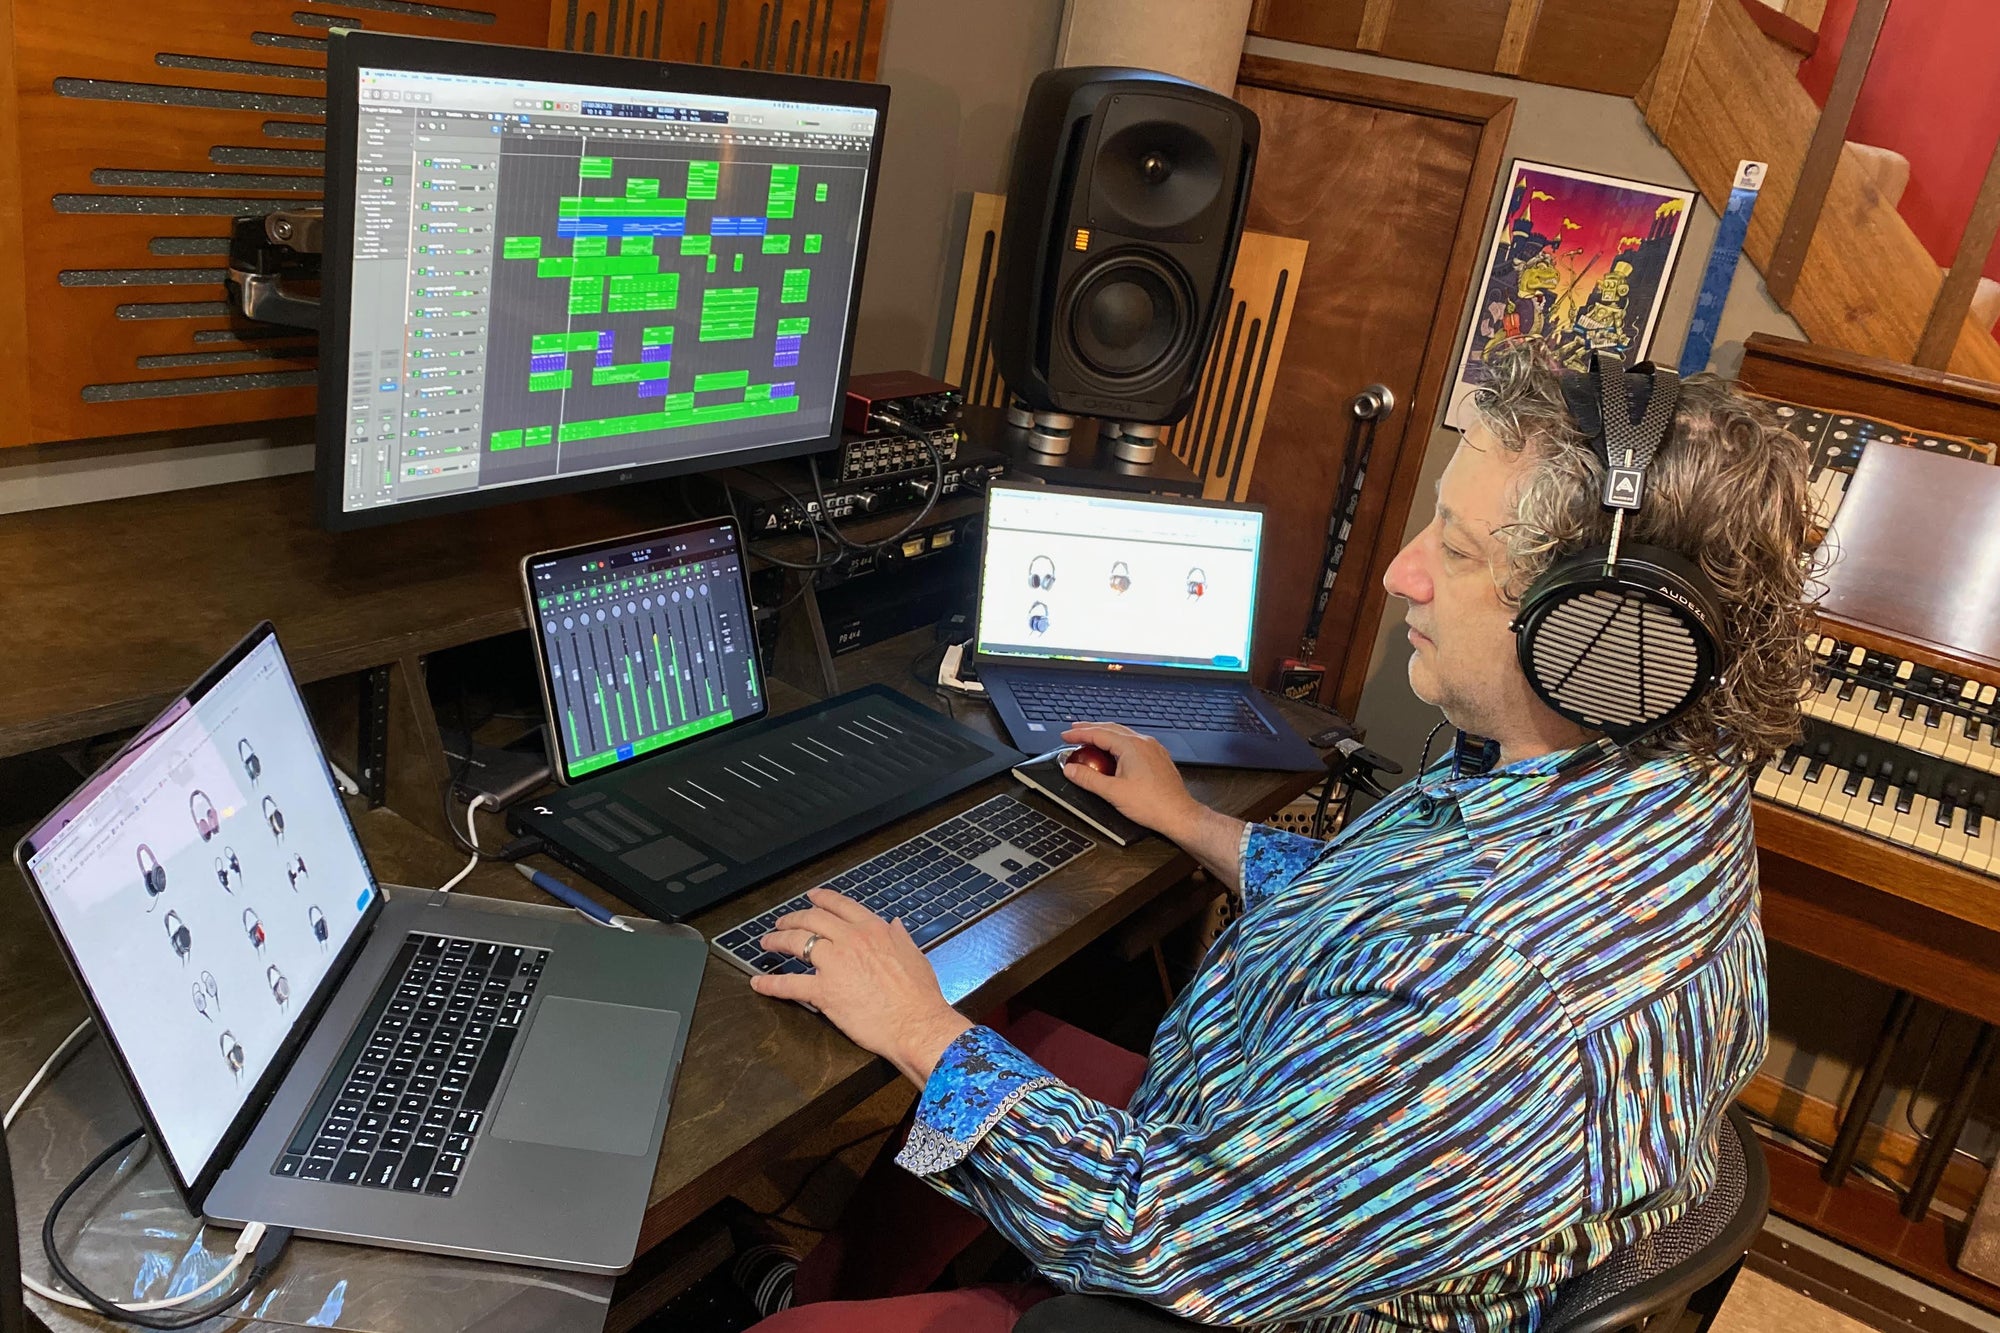 Audeze goes behind the scenes with post-production mixer and composer Dave Gross